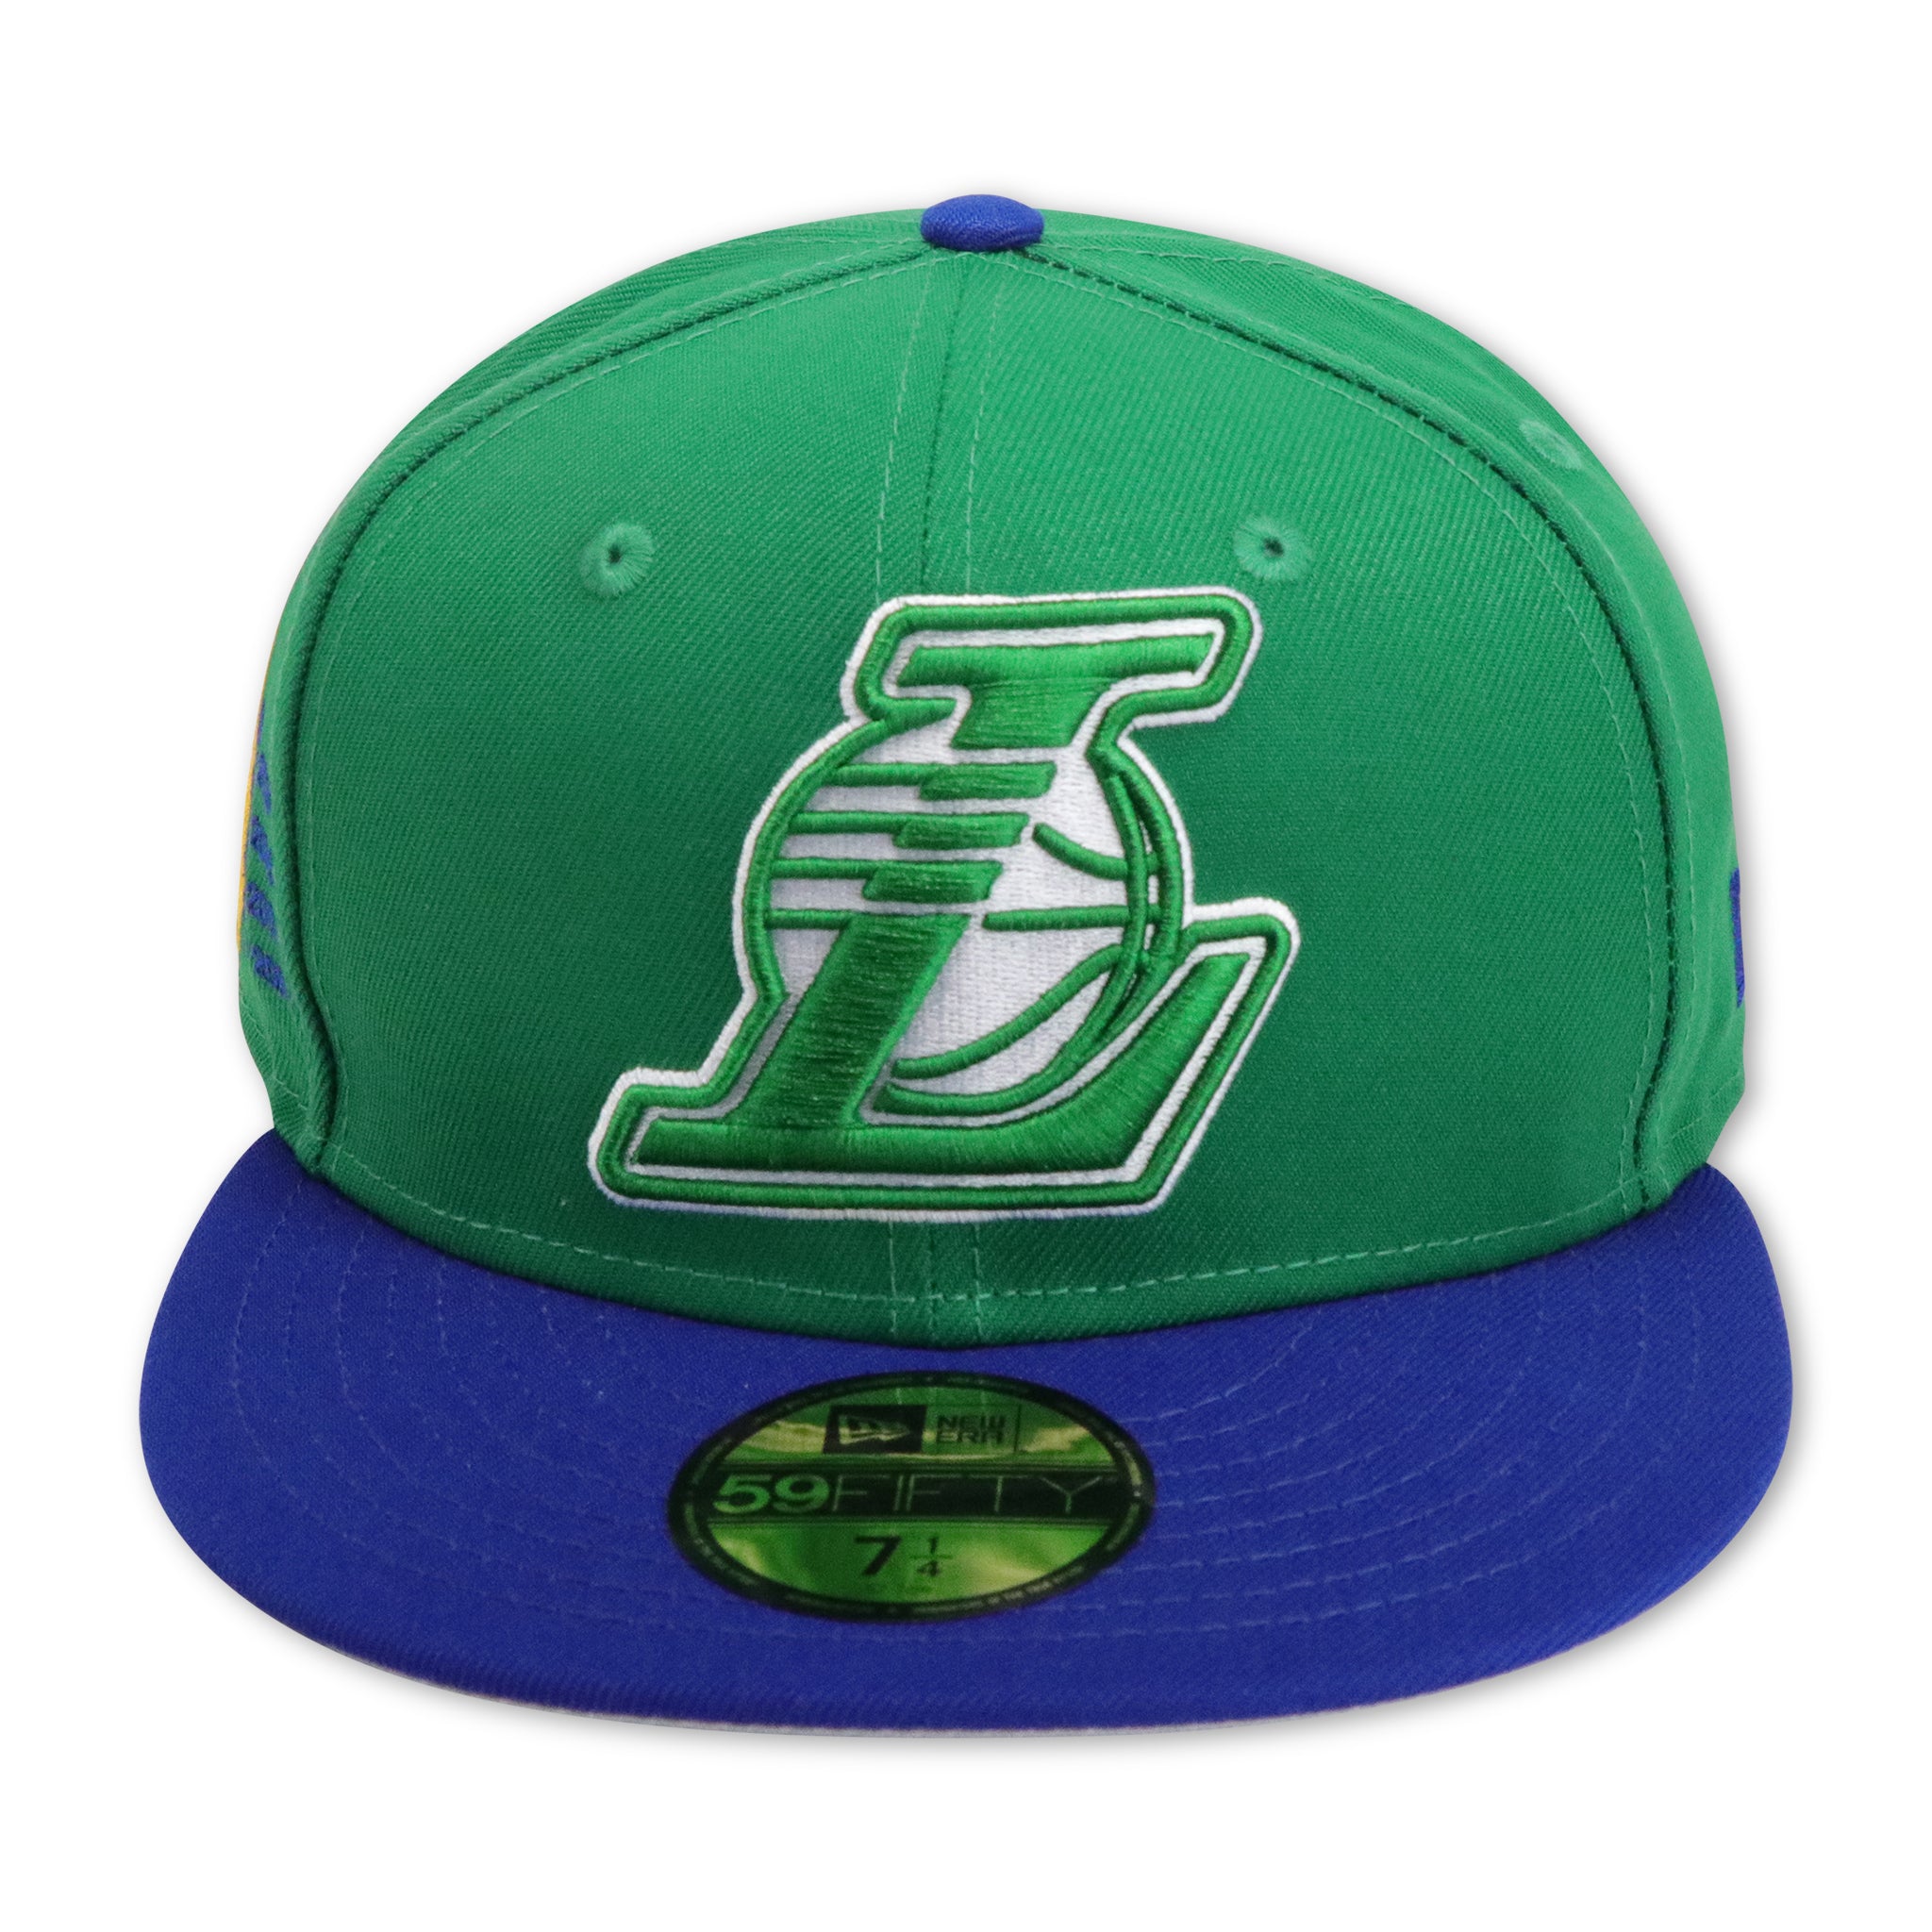 LOS ANGELES LAKERS (GREEN) "16X CHAMPIONS" NEW ERA 59FIFTY FITTED